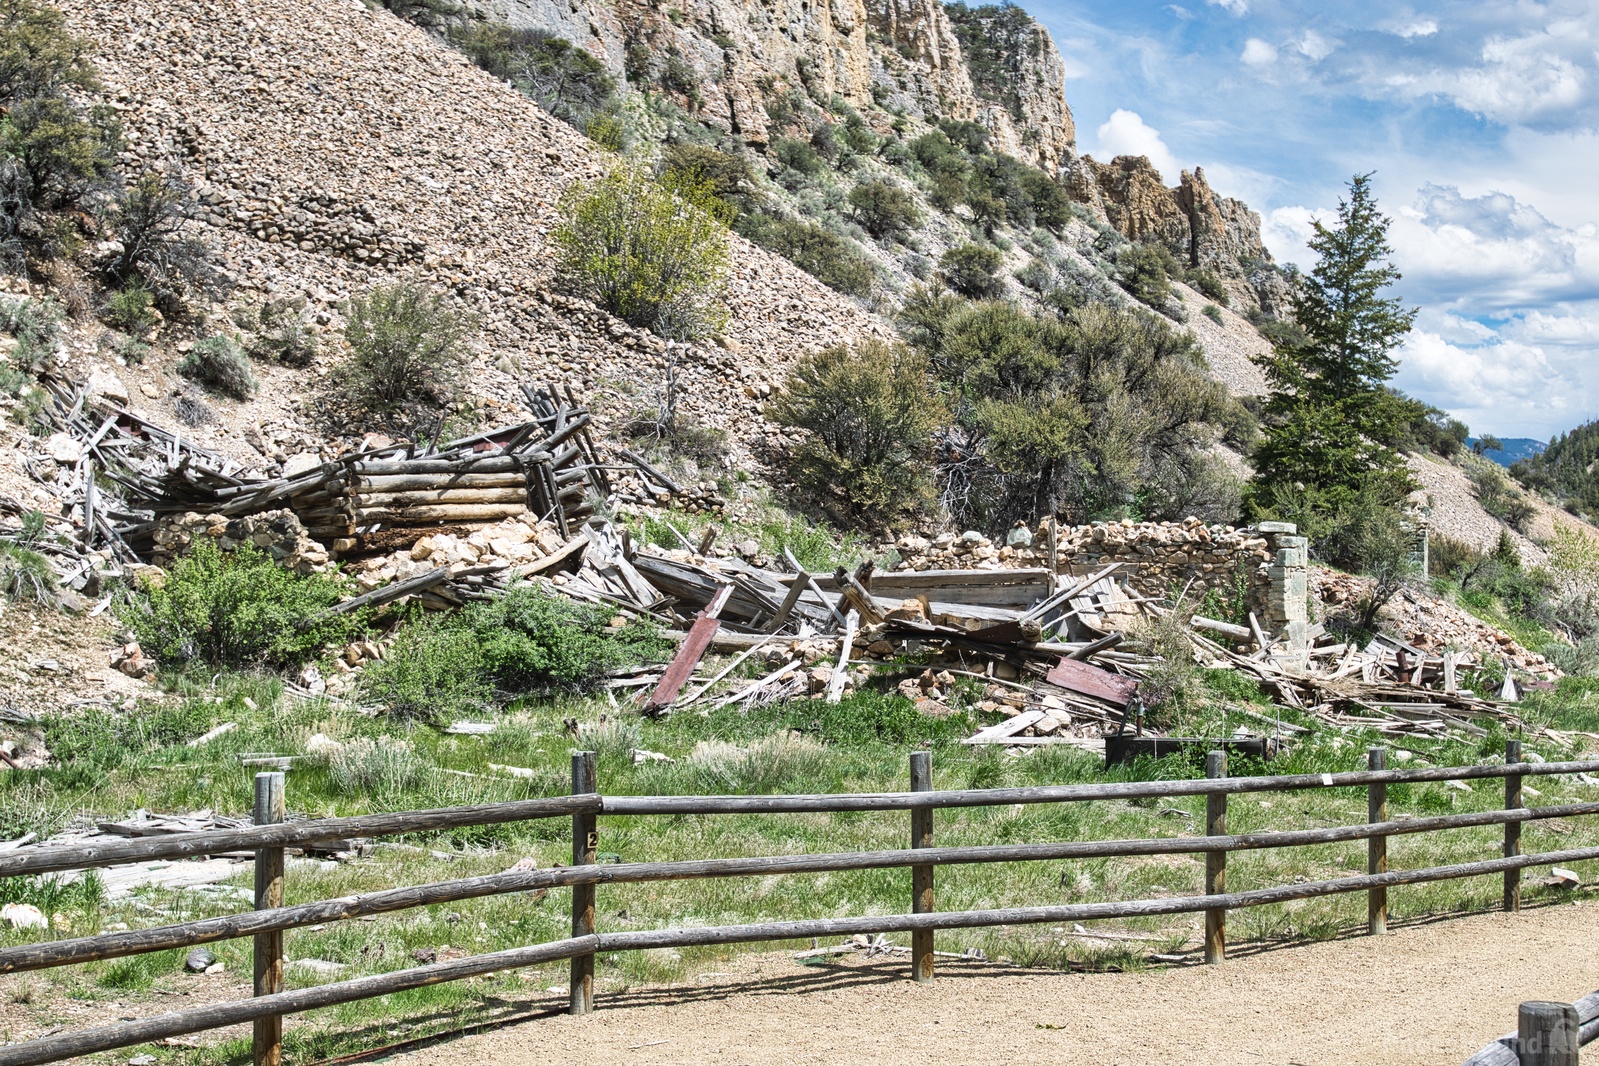 Image of Bayhorse Ghost Town by Steve West